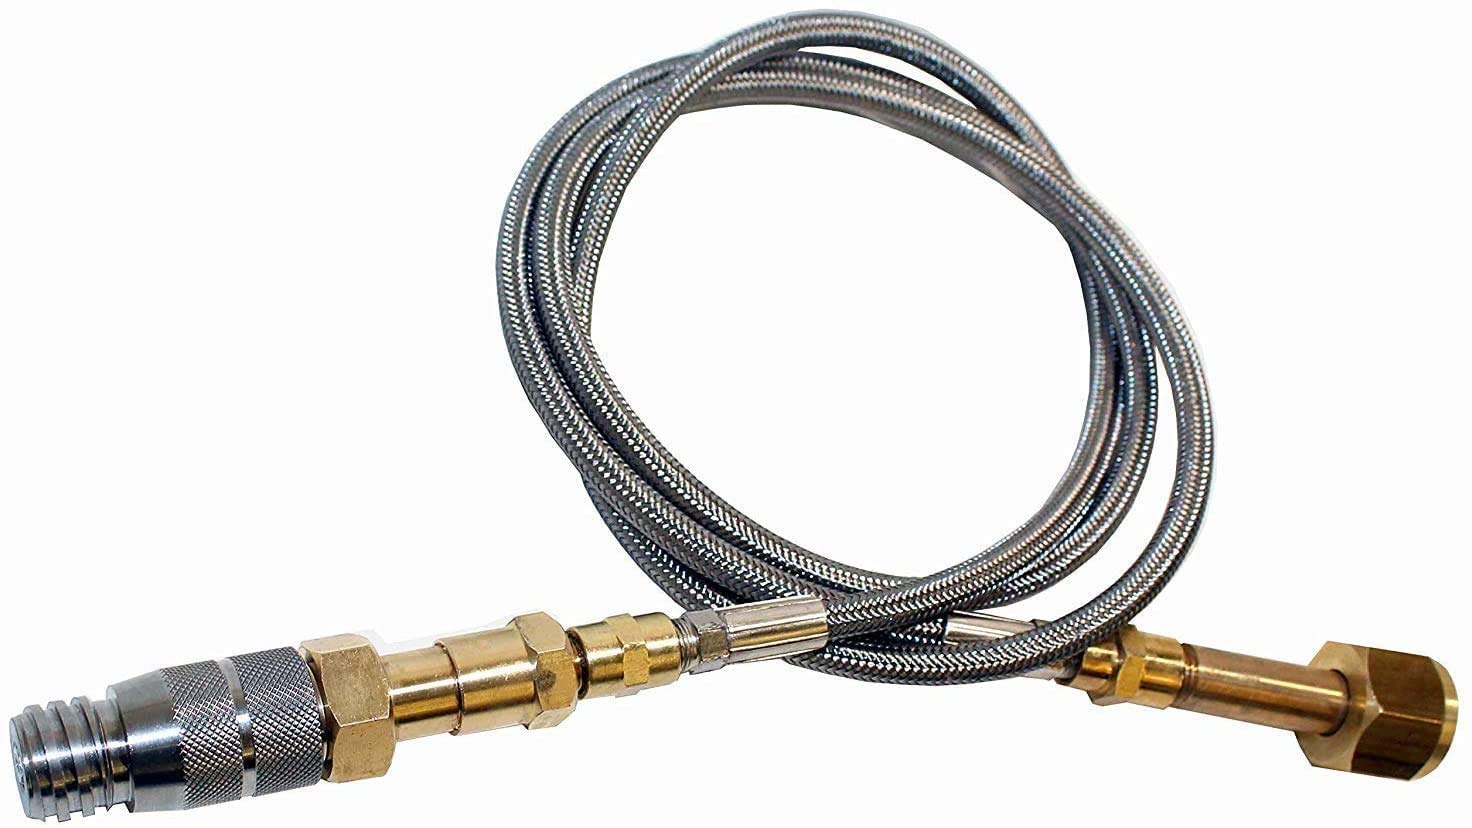 Trinity Soda Maker External Large Co2 Cga-320 Tank Adapter System Adapter and Hose Stainless Steel 60 inches Long co2 Accessories for Home soda…